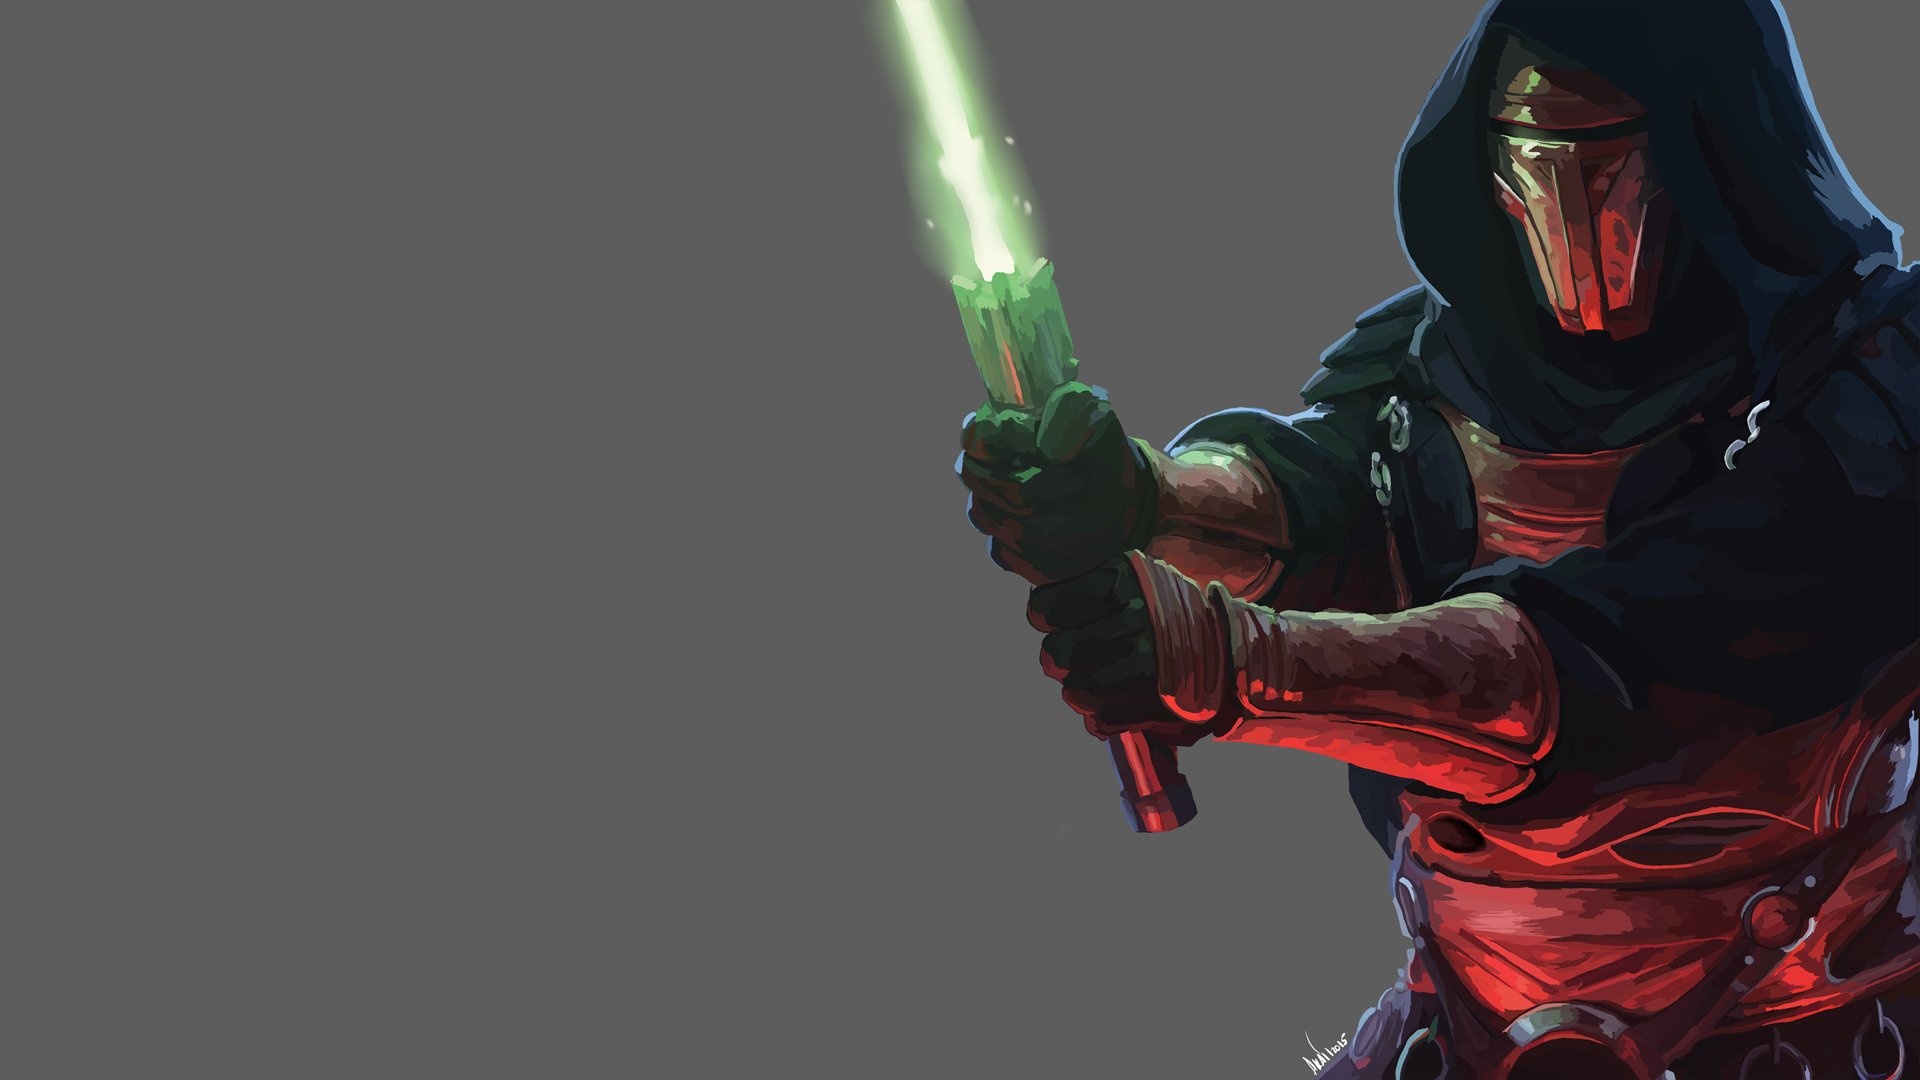 Darth Revan: The player character of the role-playing video game Star Wars: Knights of the Old Republic. 1920x1080 Full HD Wallpaper.